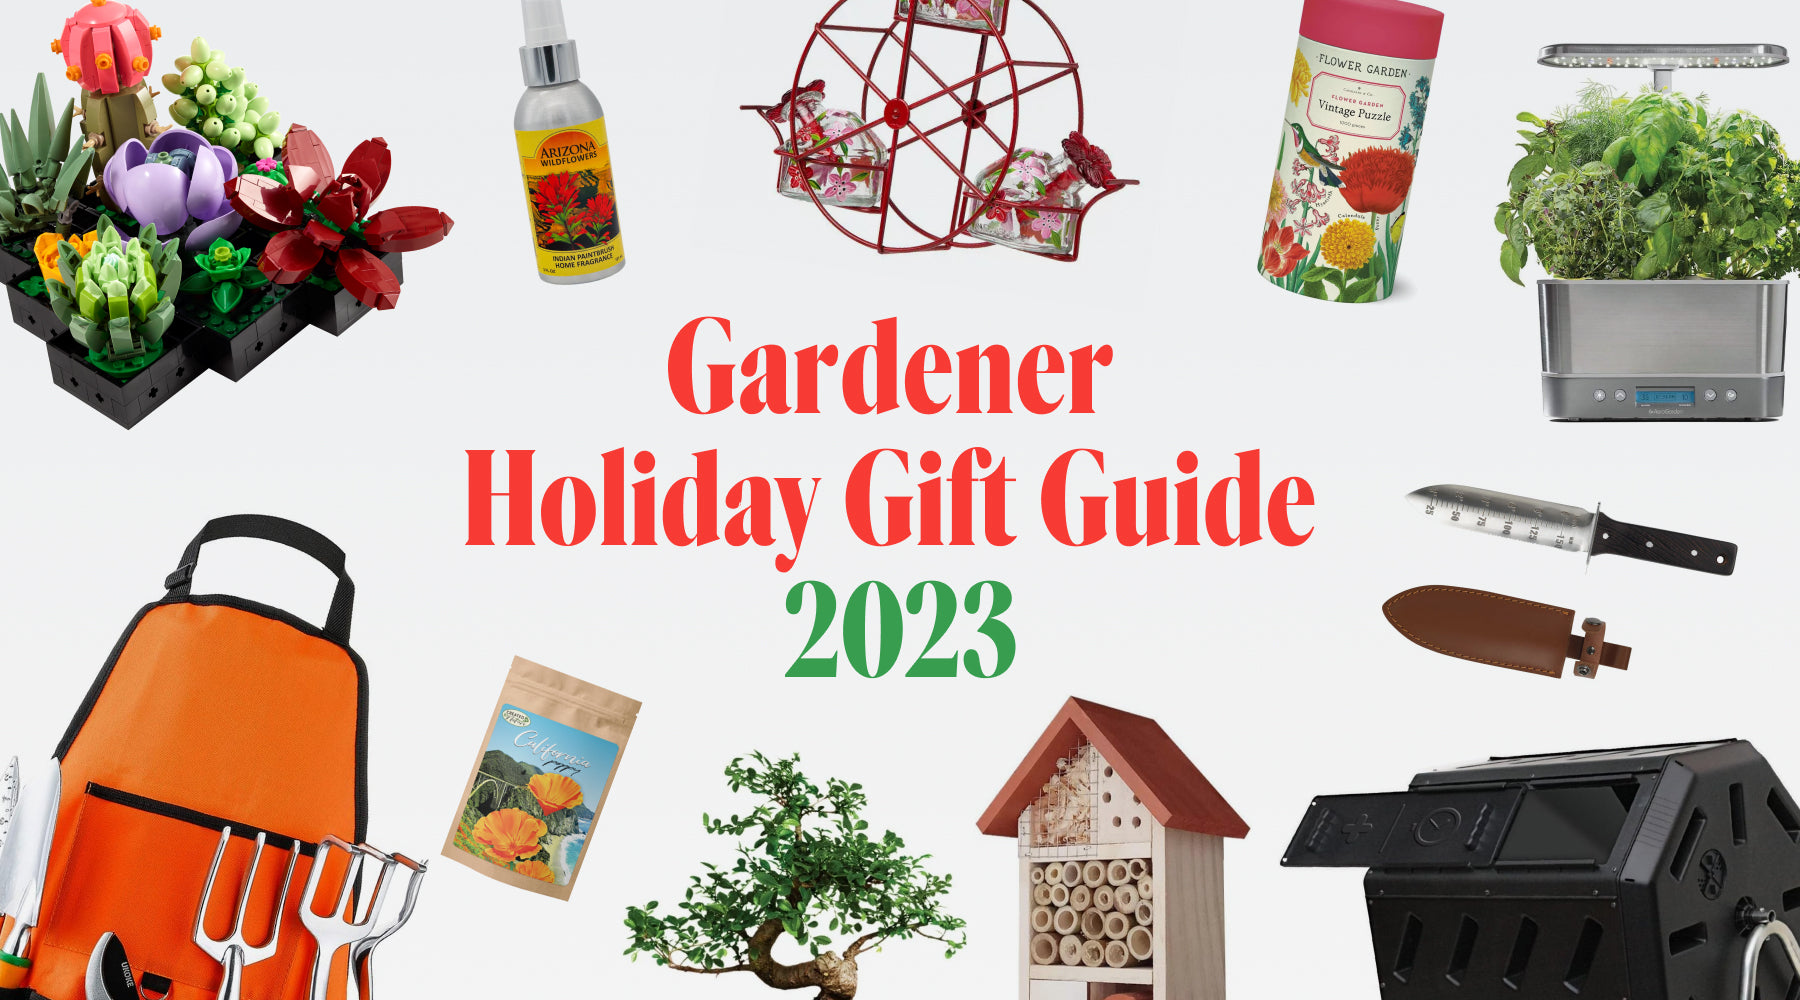 Wildflower Gift Ideas: The Ultimate Gift Guide for Gardeners in 2023